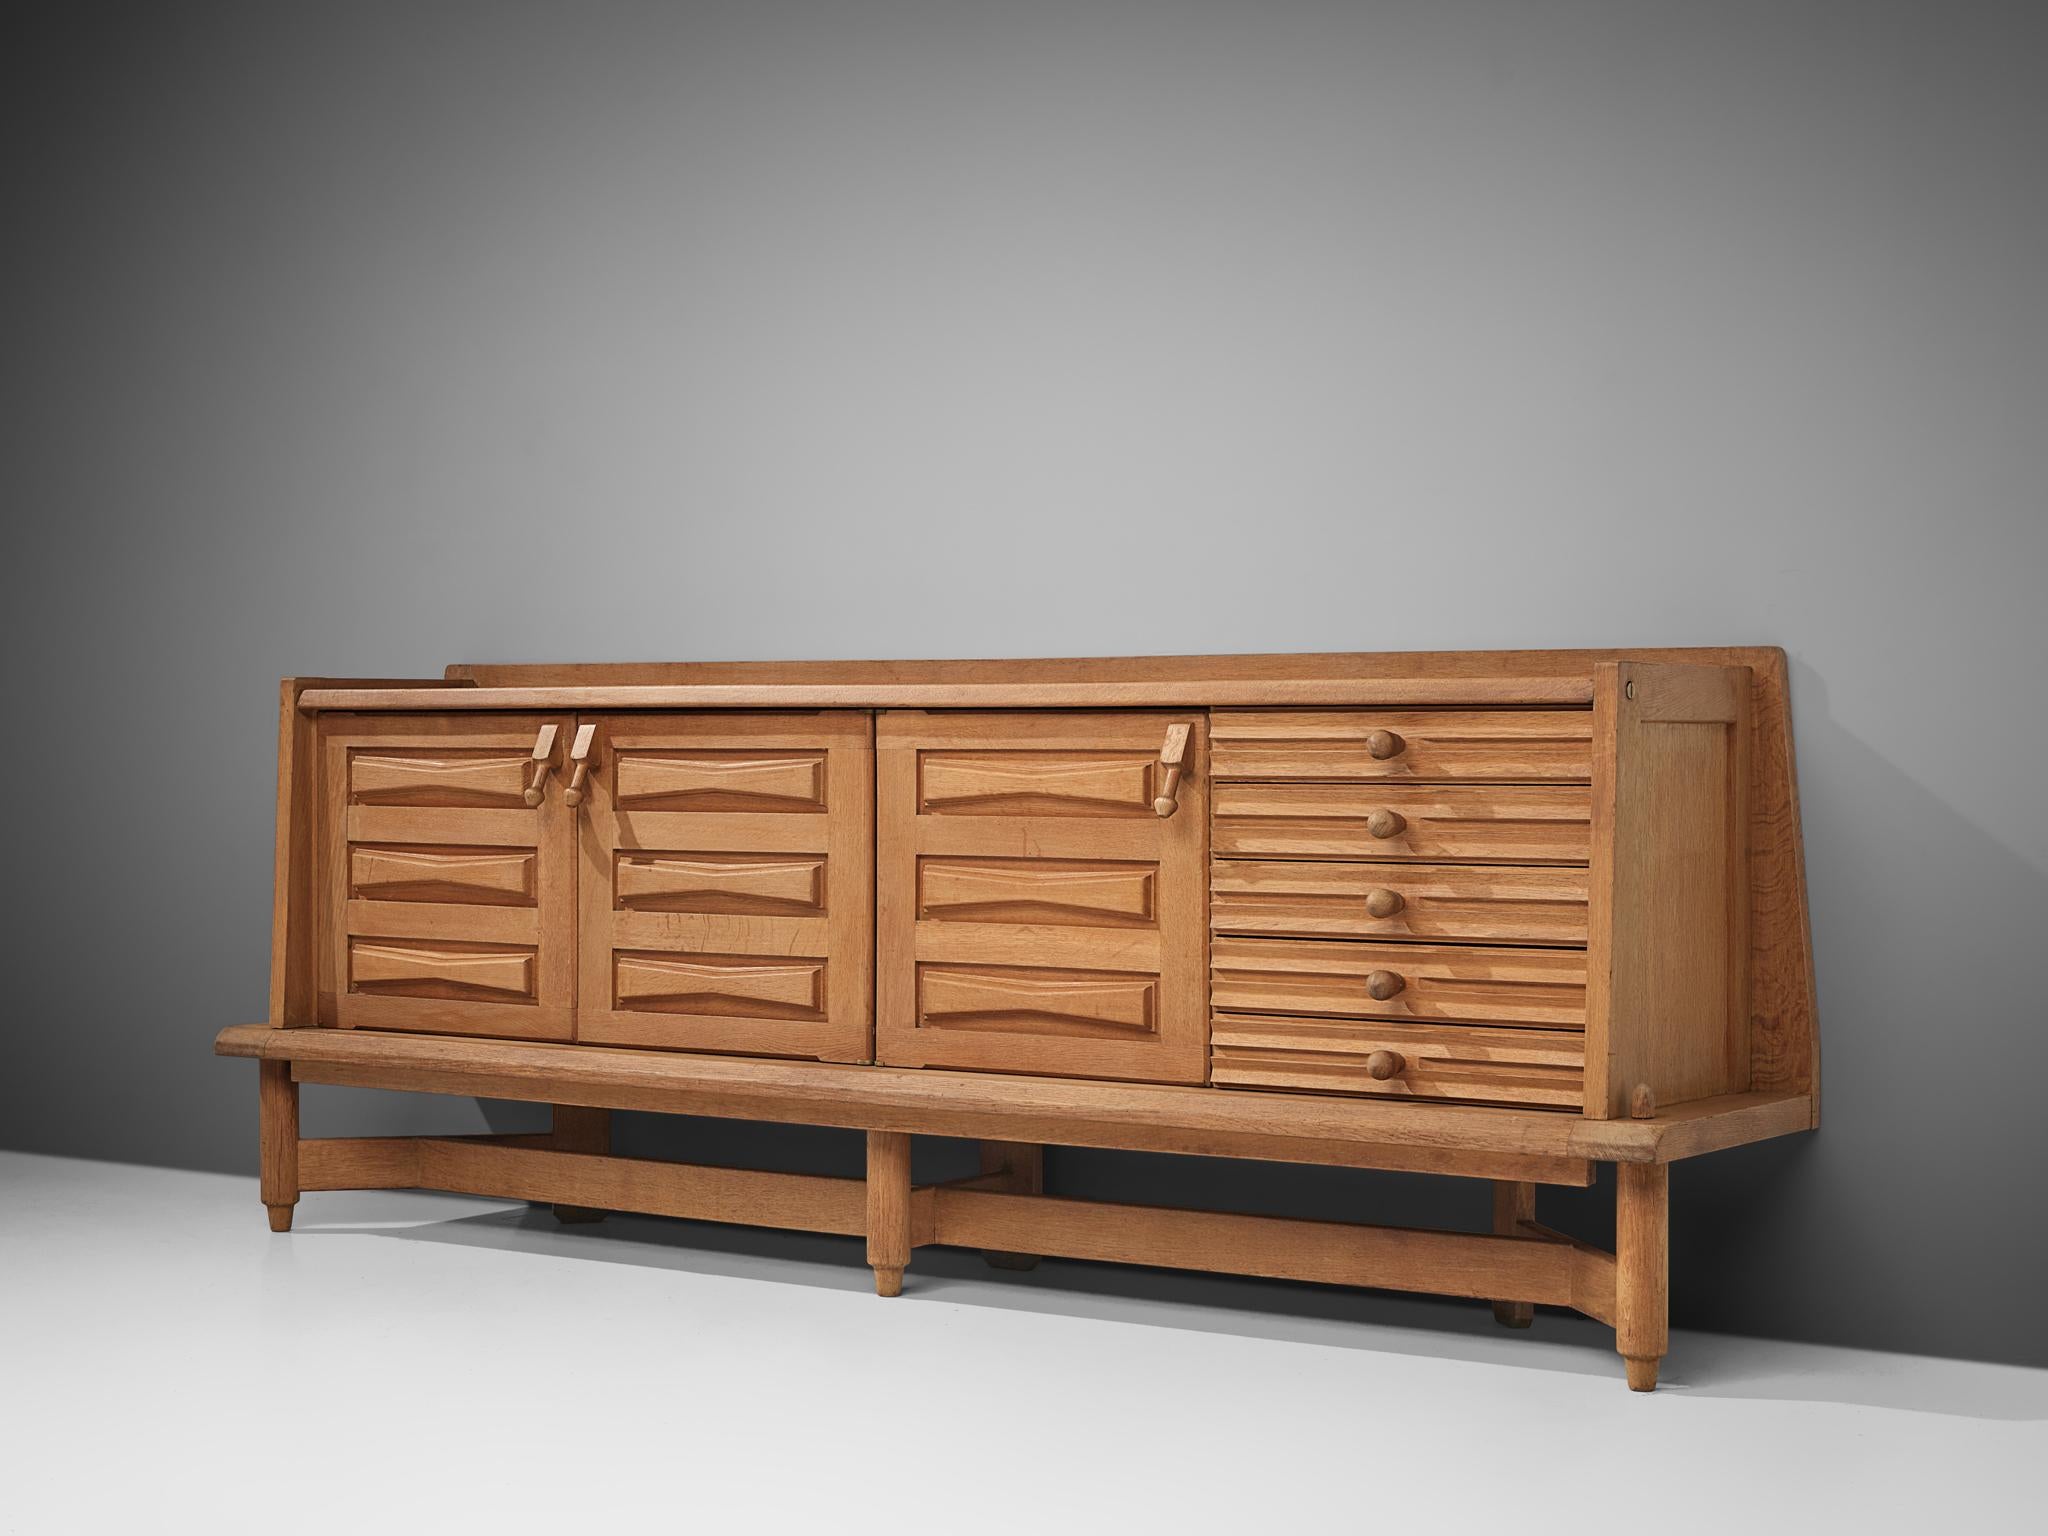 Guillerme et Chambron, large sideboard in oak, France, 1960s.

This large sideboard is designed by the company Guillerme et Chambron. It features a geometric structure on the front side, with protruding door handles on the top of the doors. Behind